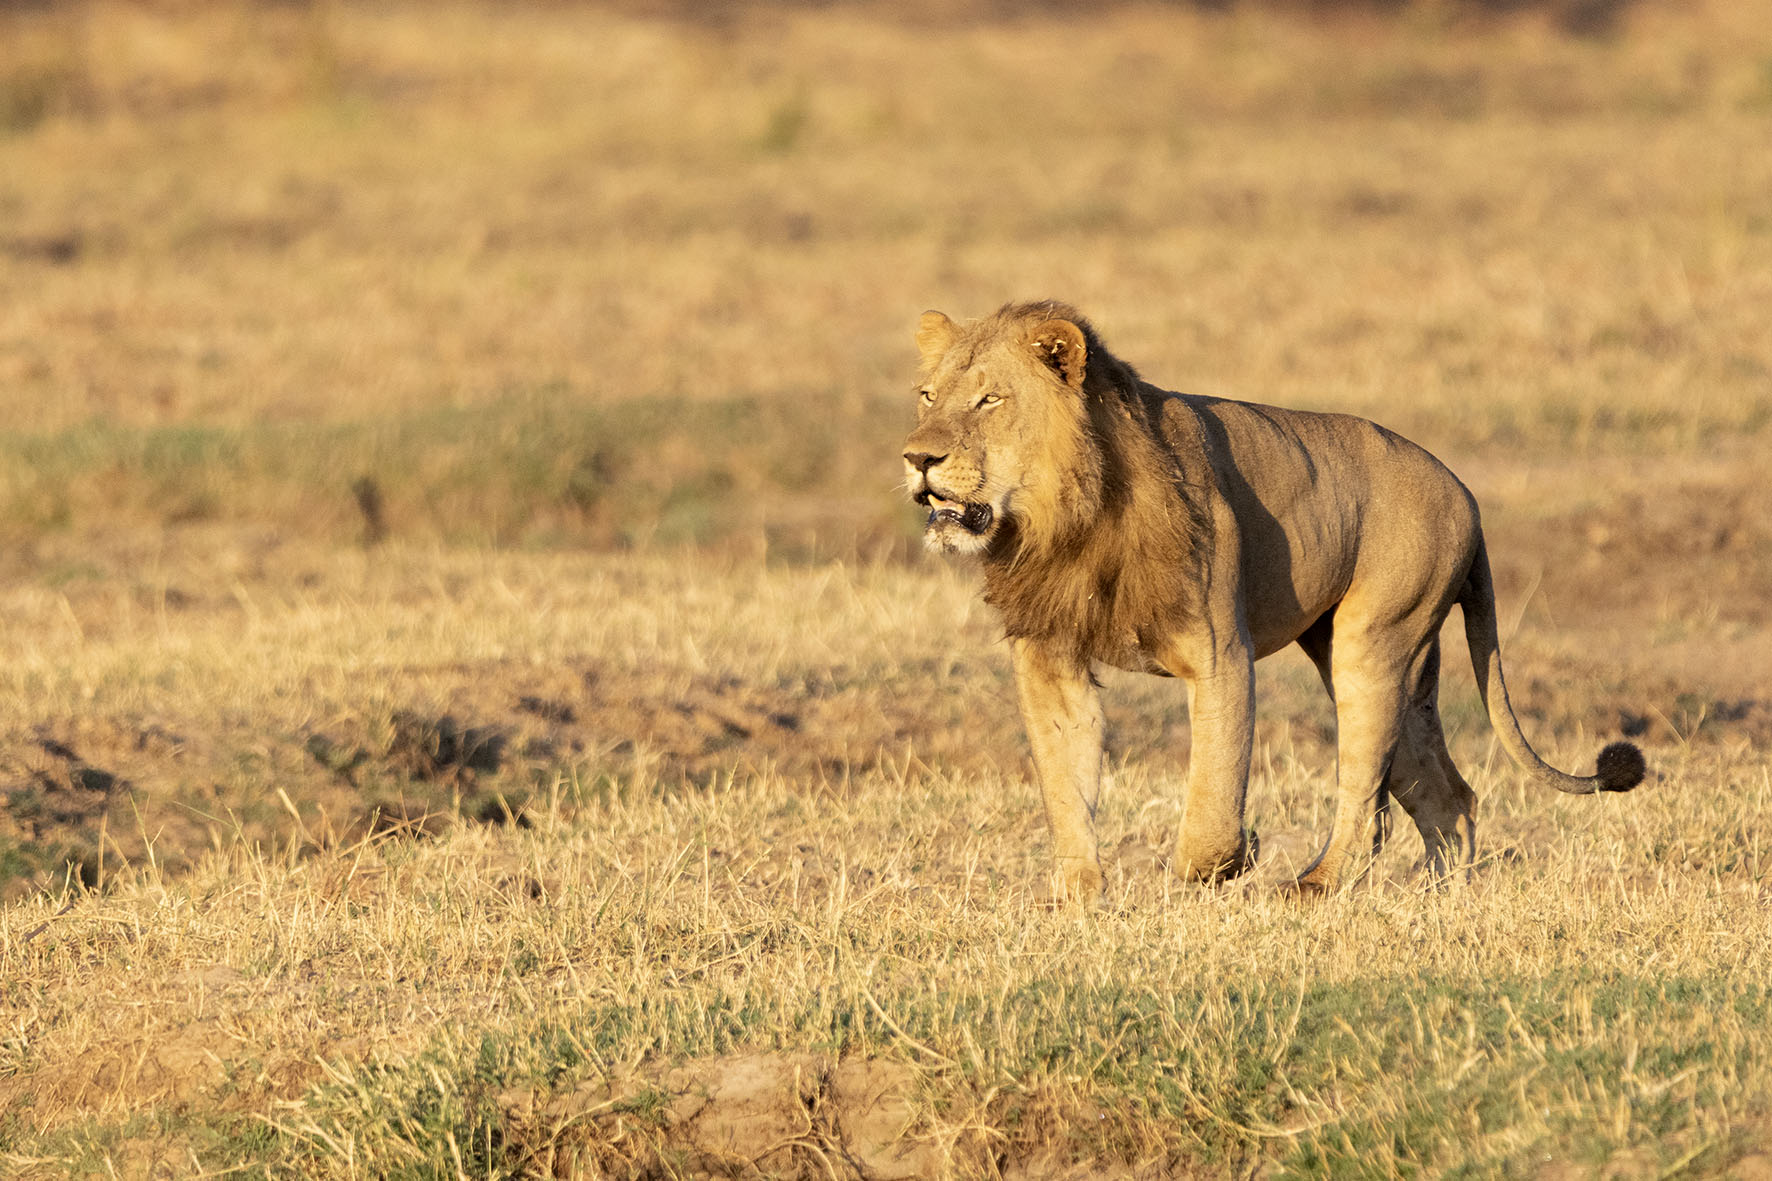 A male lion basking in the sun spotted while visiting Ruckomechi